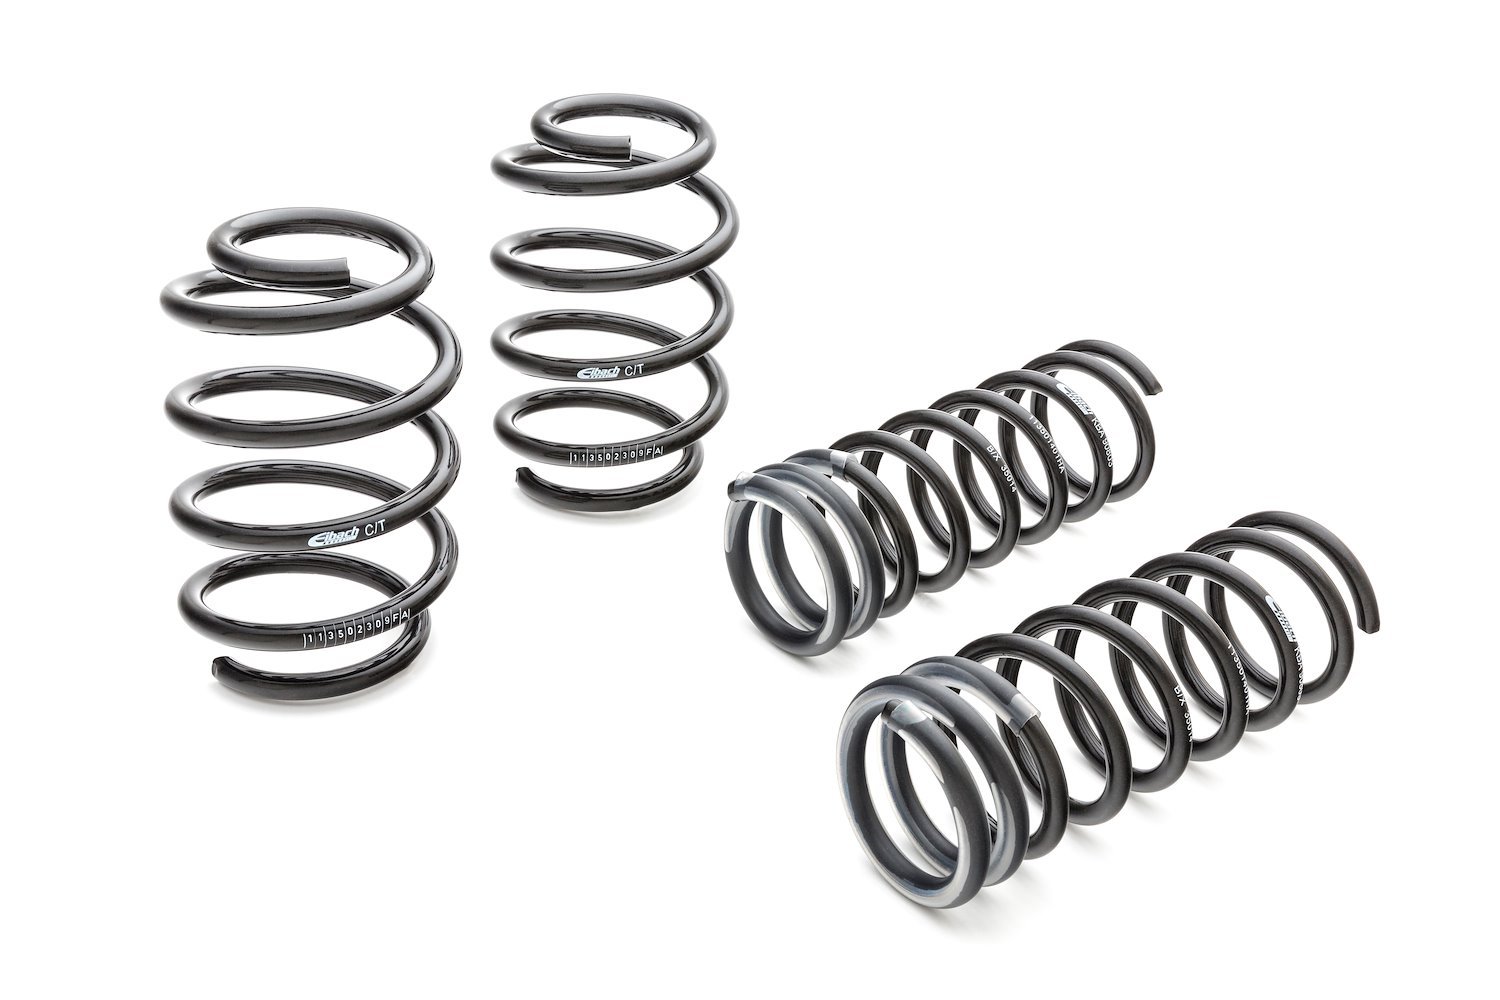 15105.140 Pro-Kit Lowering Springs 2009-2016 Audi A4/A4 Quattro - 1.400 in. Front/1.200 in. Rear Drop